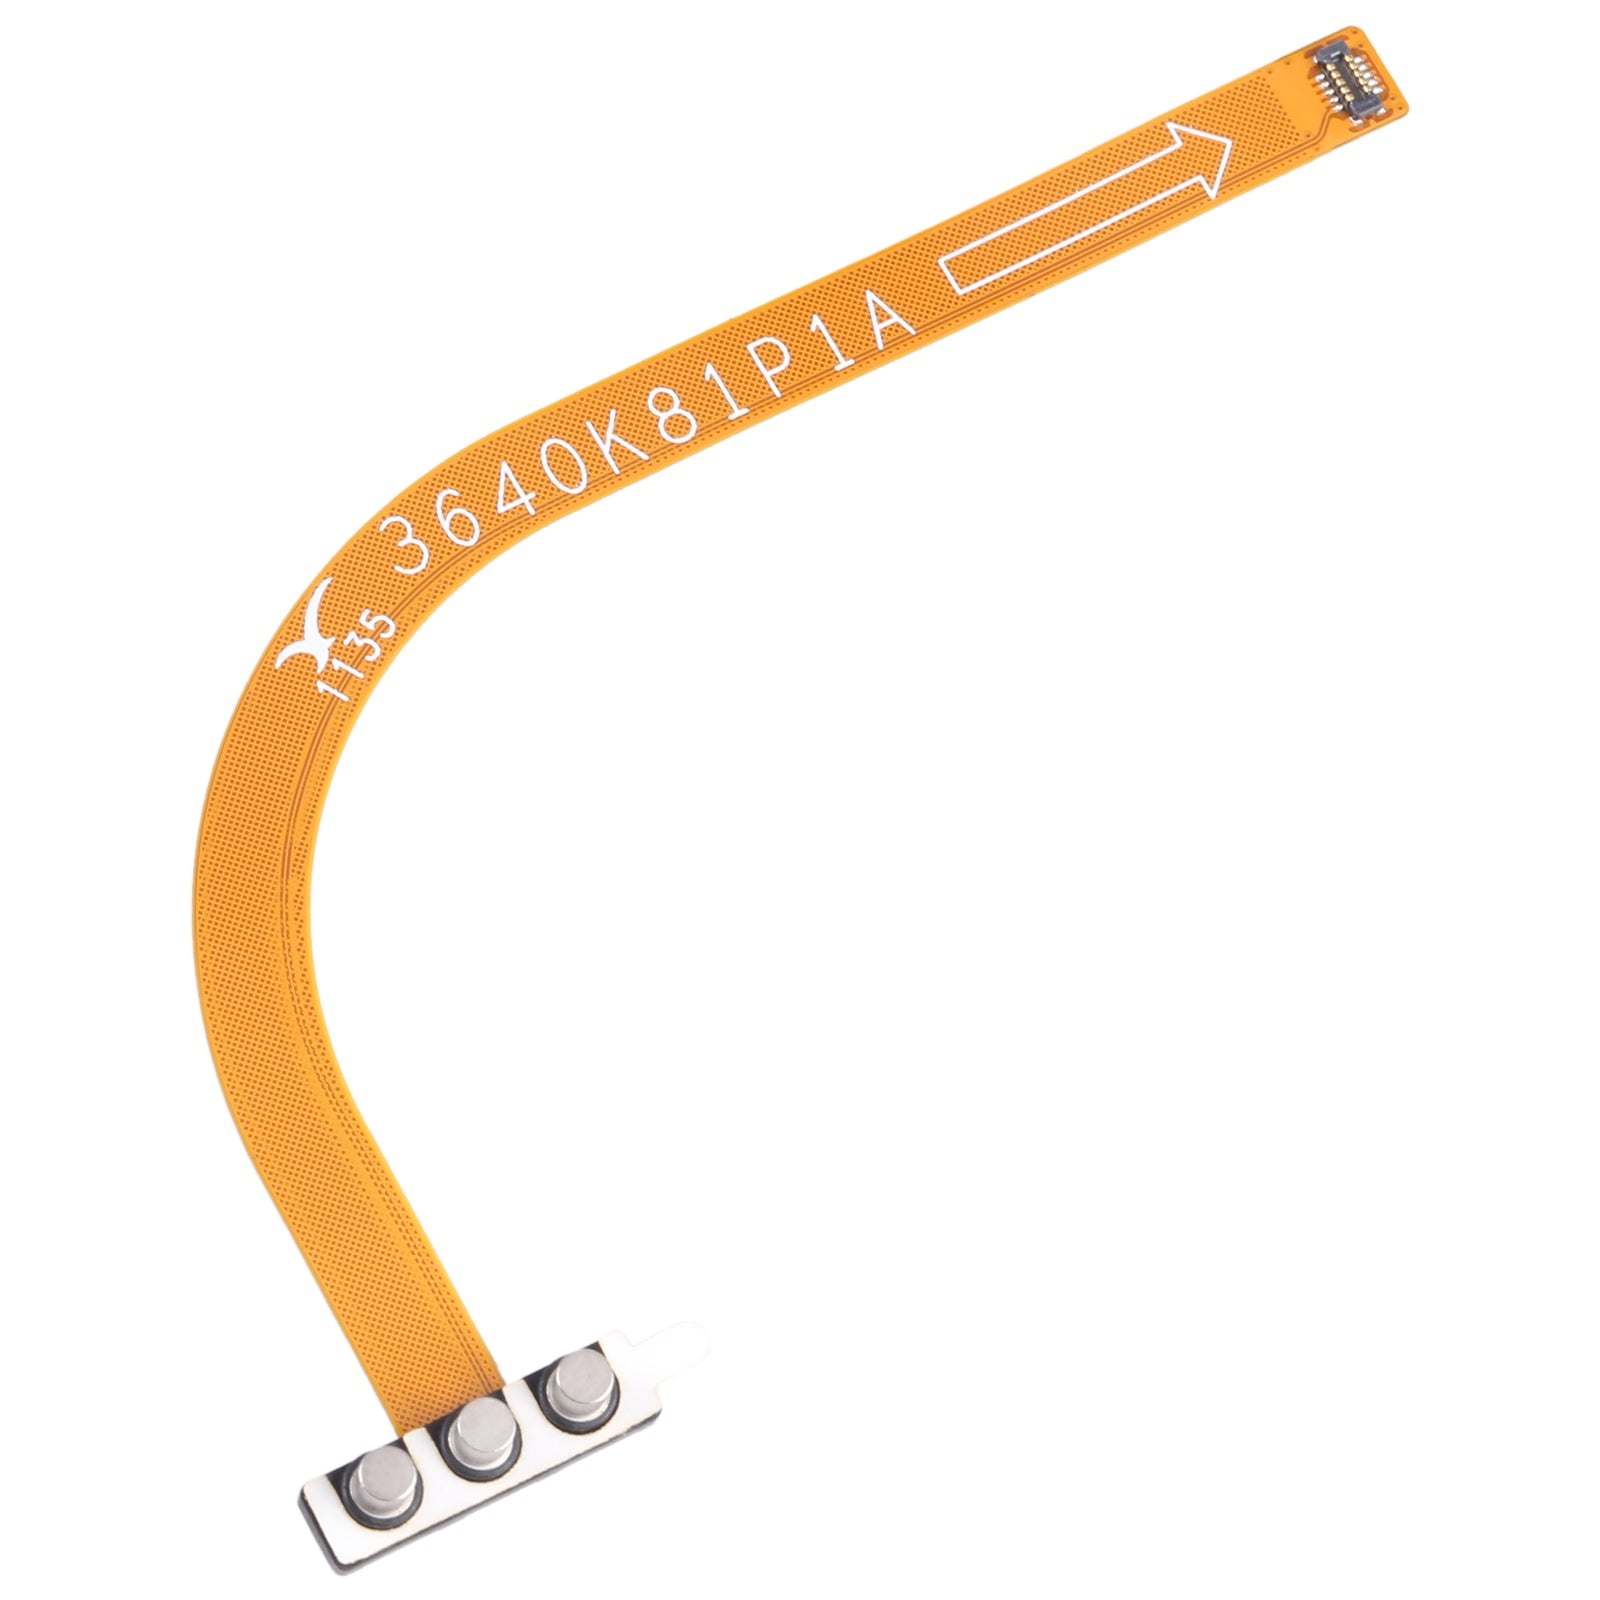 Xiaomi Pad 5 Pro Keyboard Touch Connector Flex Cable